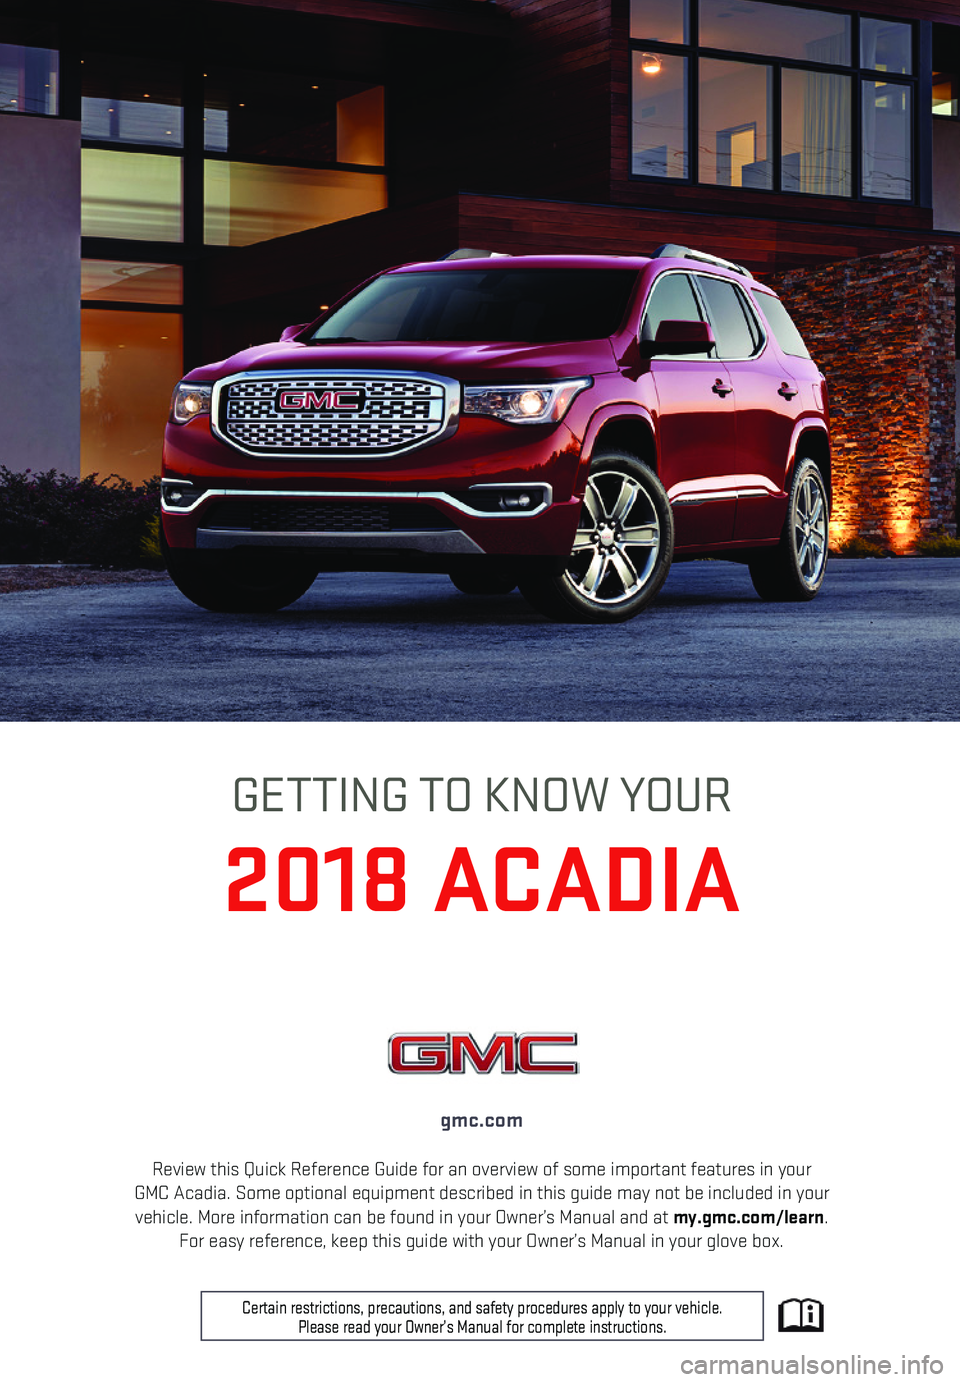 GMC ACADIA 2018  Get To Know Guide 